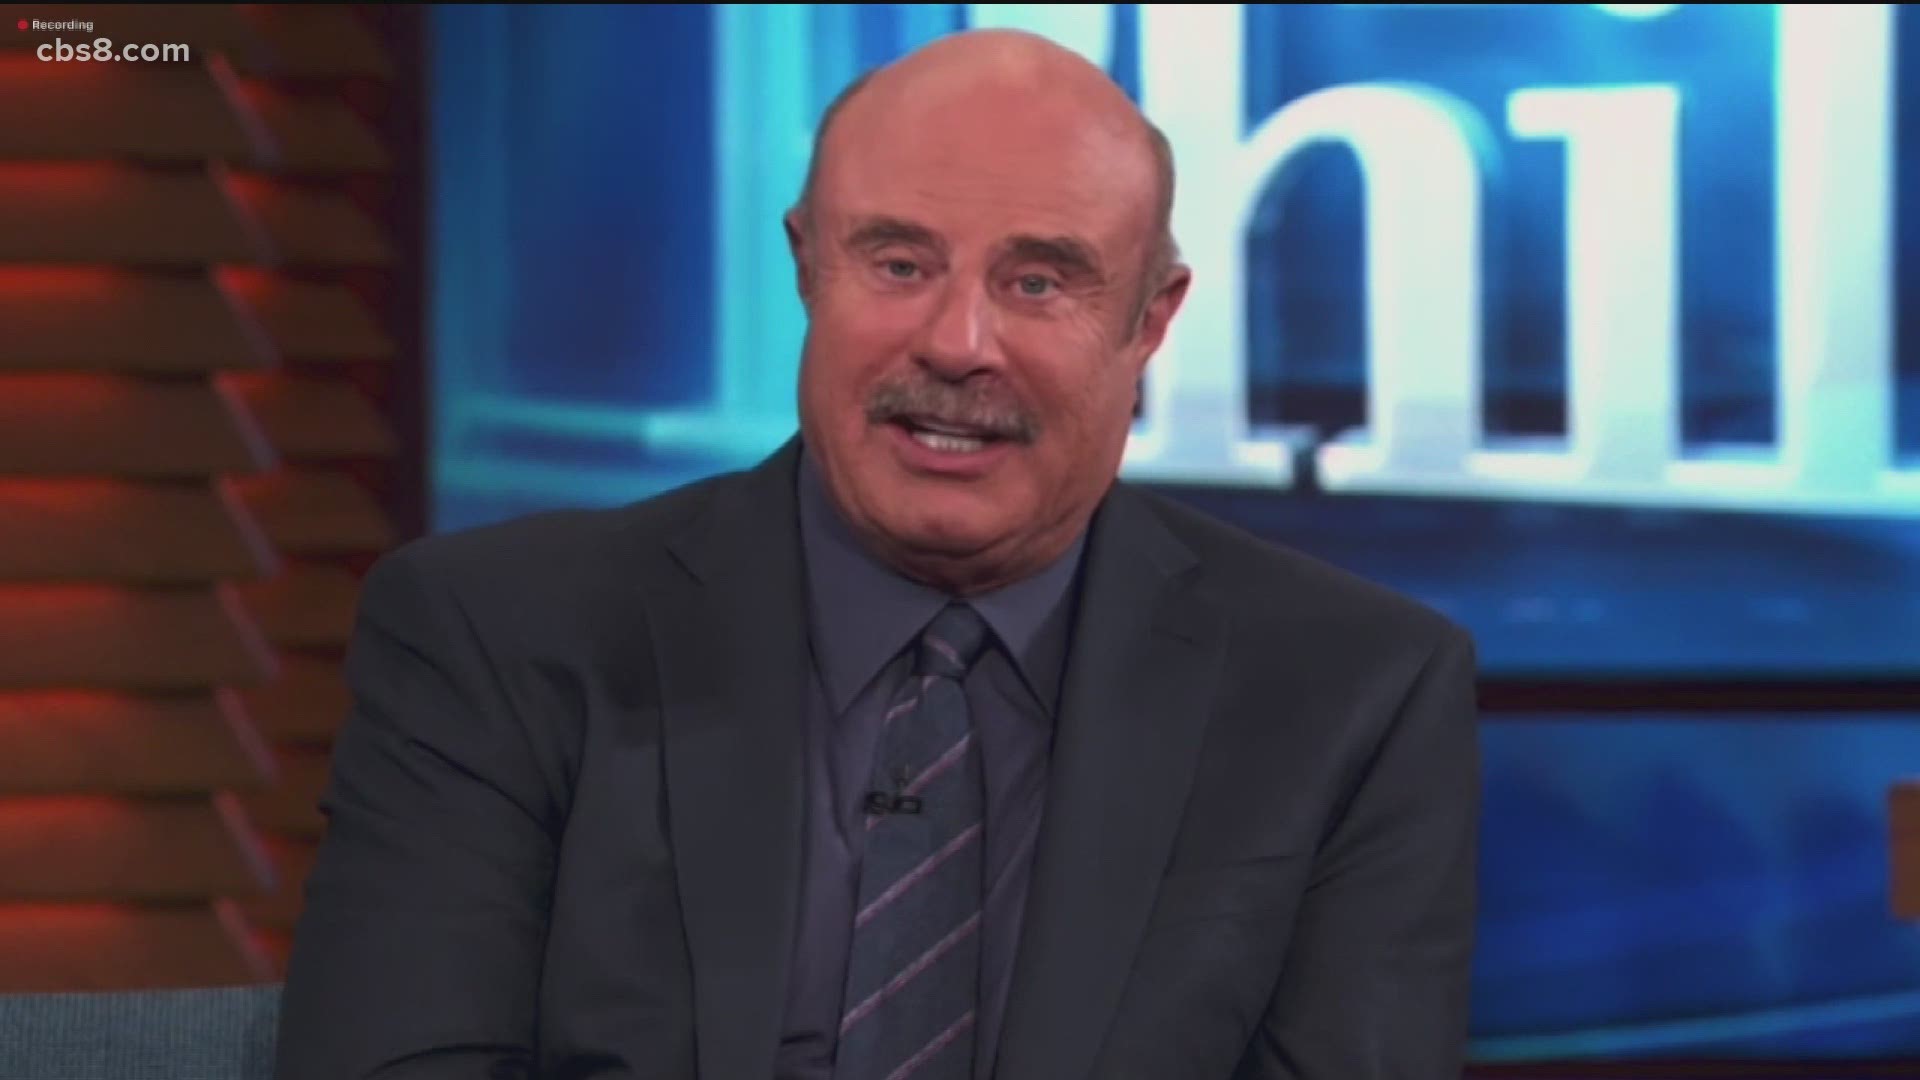 Dr. Phil says old dogs can learn new tricks. His 19th season begins with 80% of the staff working from home.